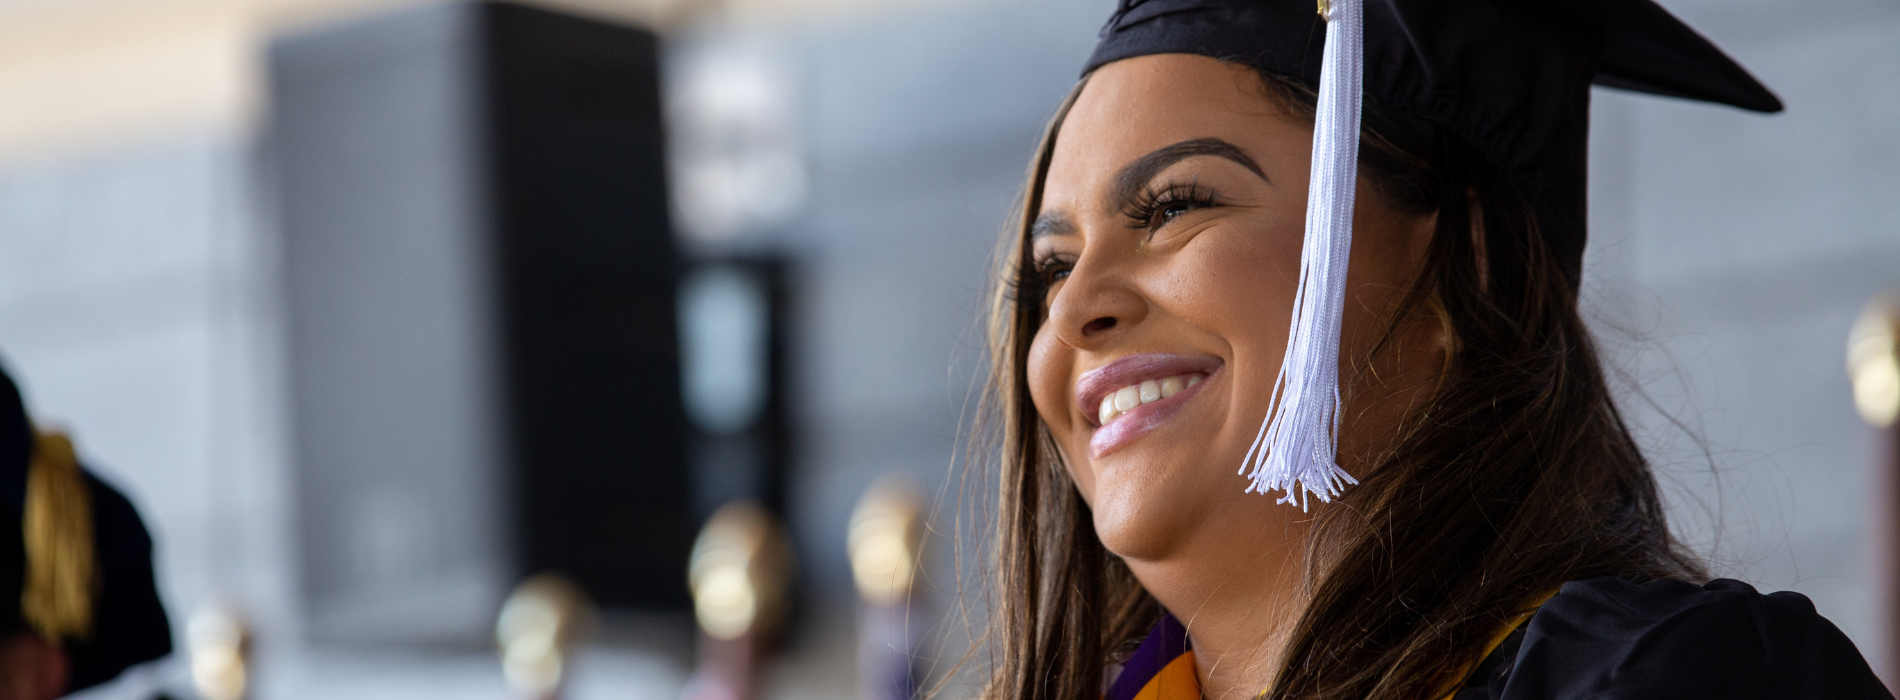 A graduate is smiling and wearing a graduation cap.